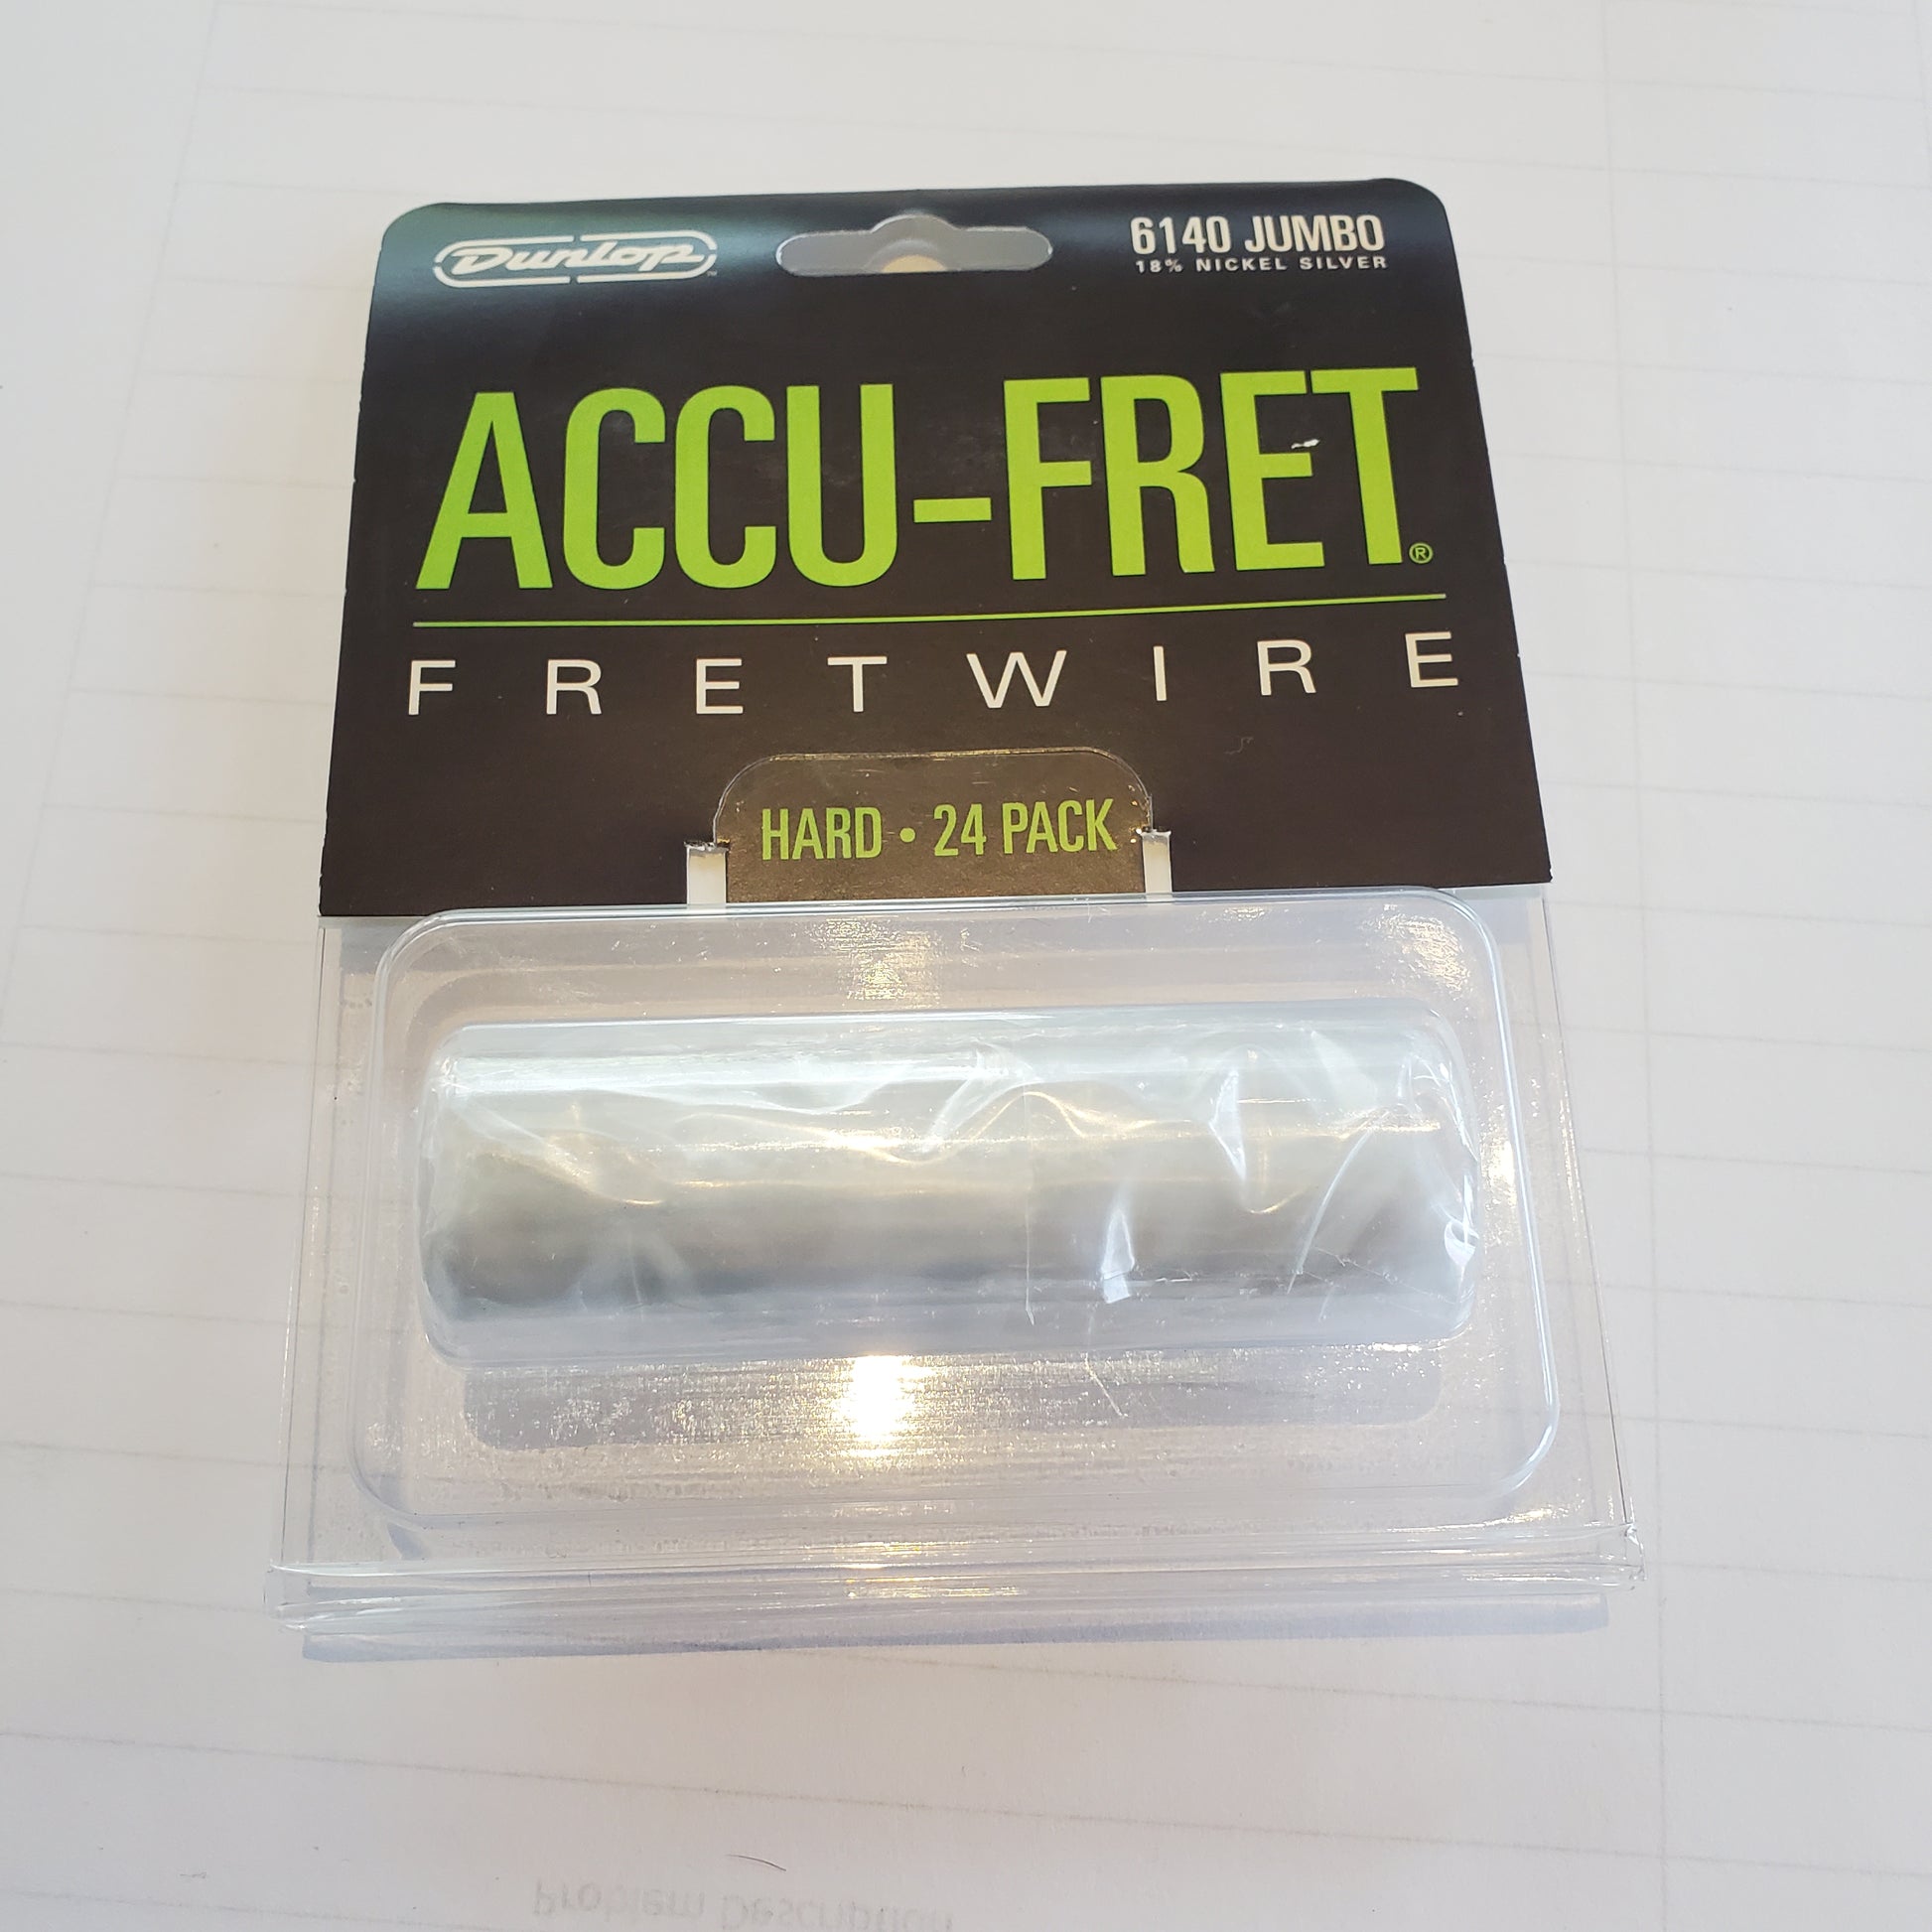 Fret Wire - A&M Wood Specialty